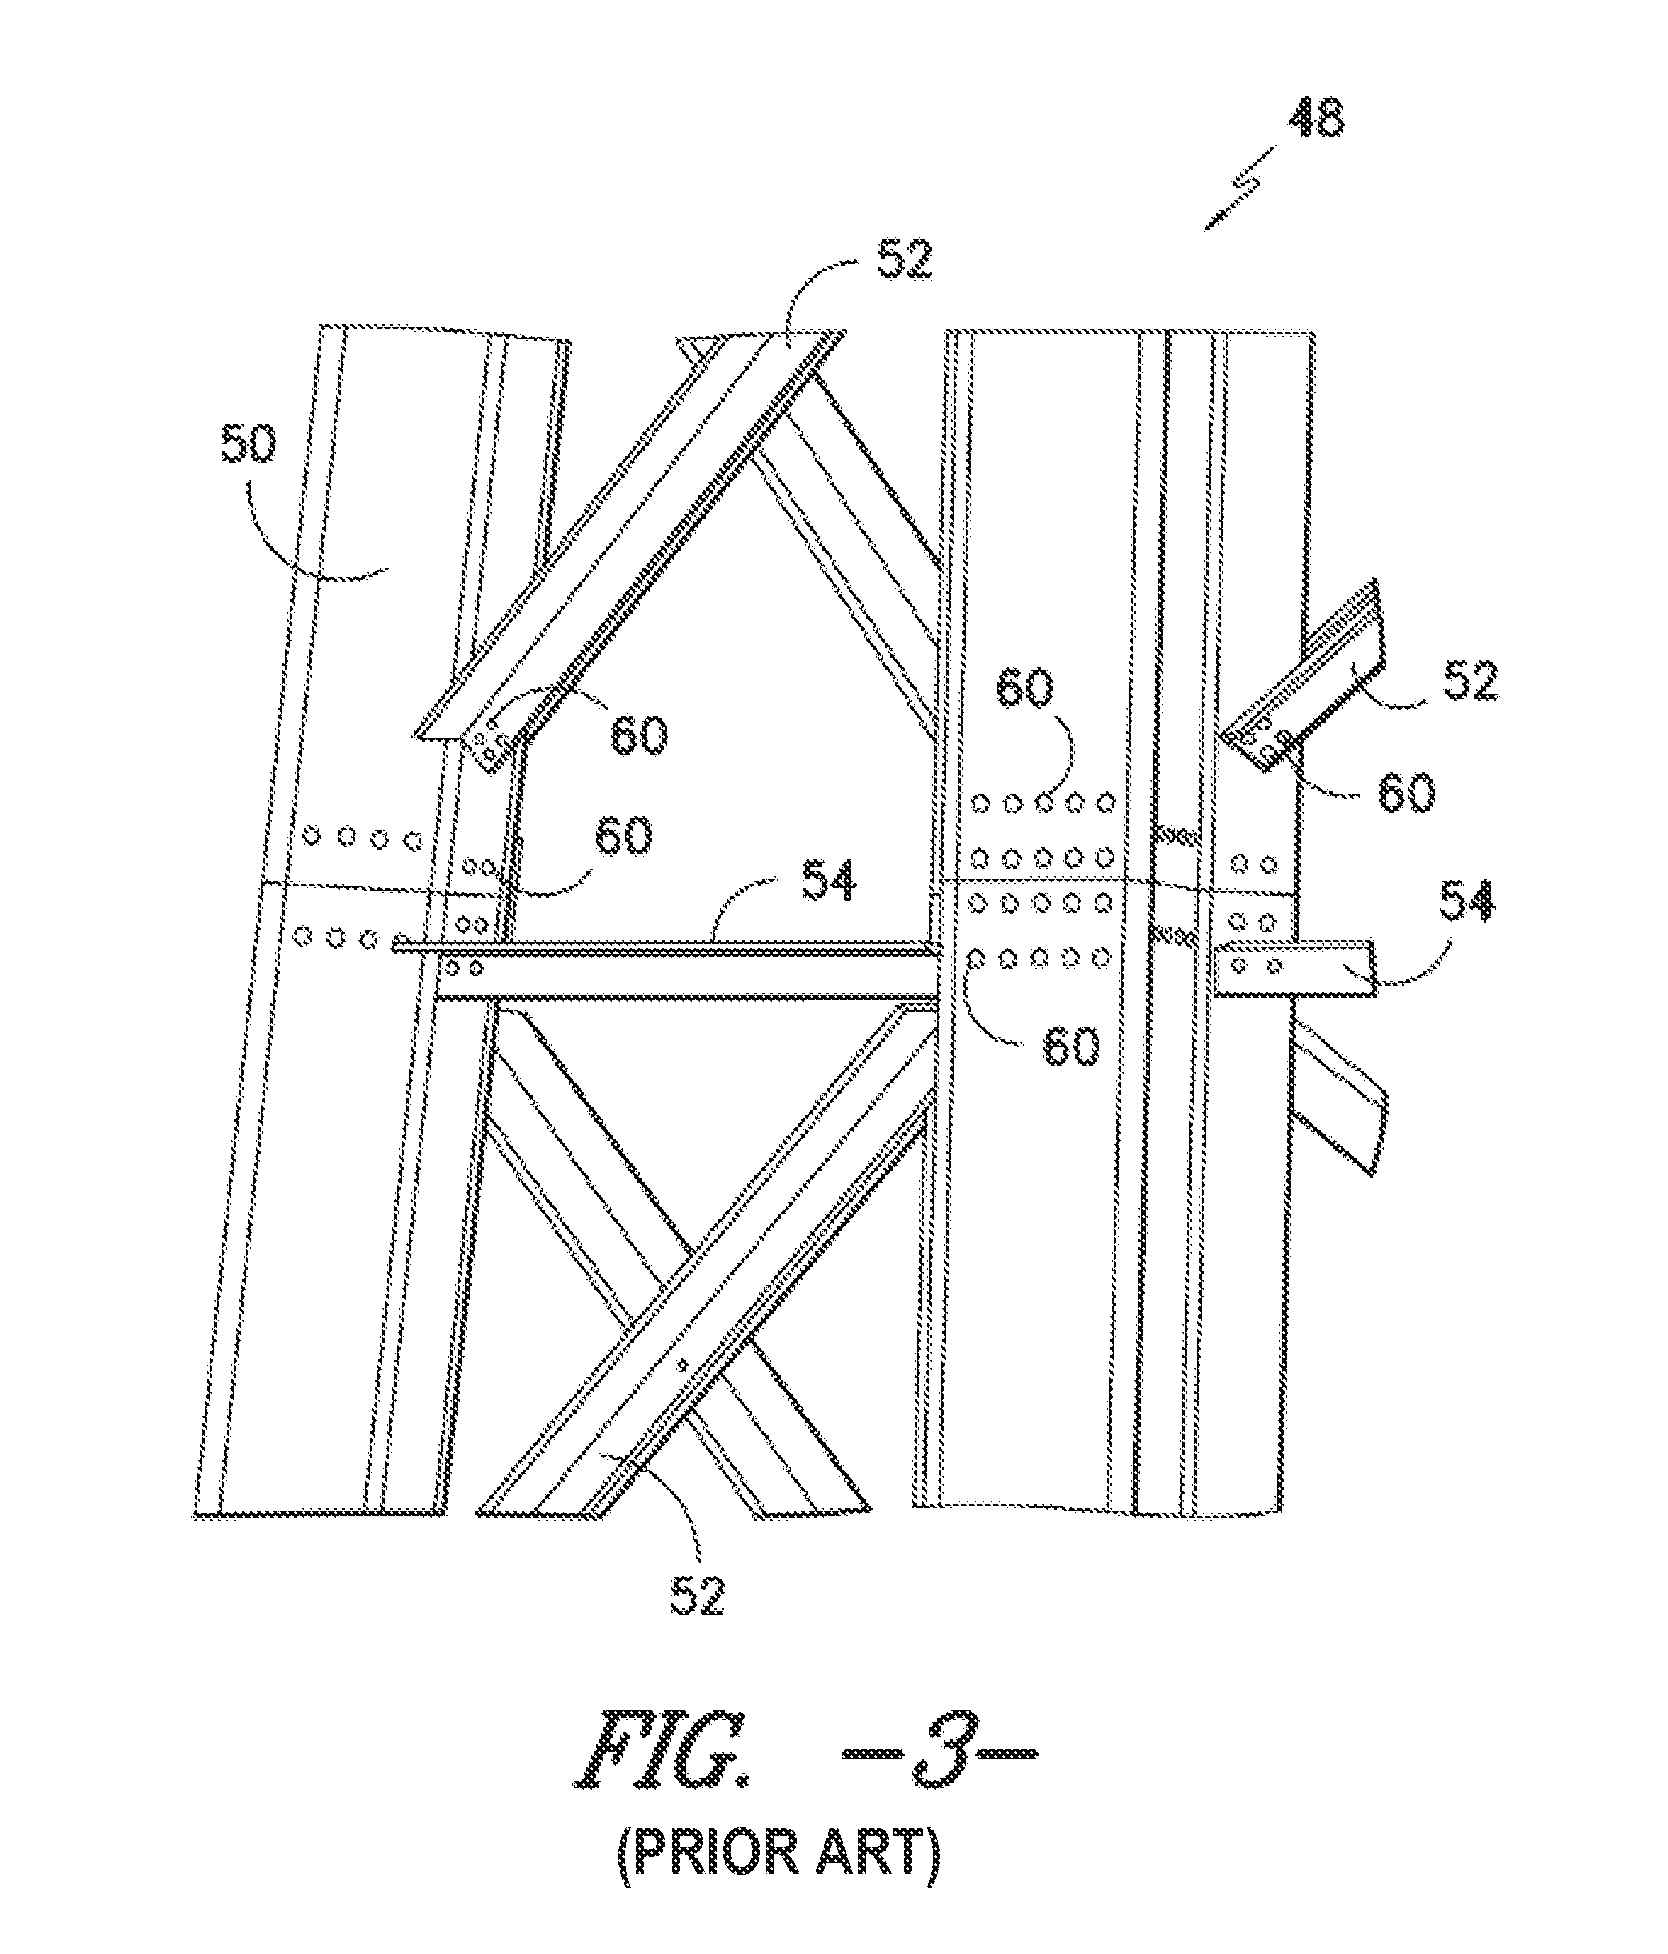 Lattice tower assembly for a wind turbine